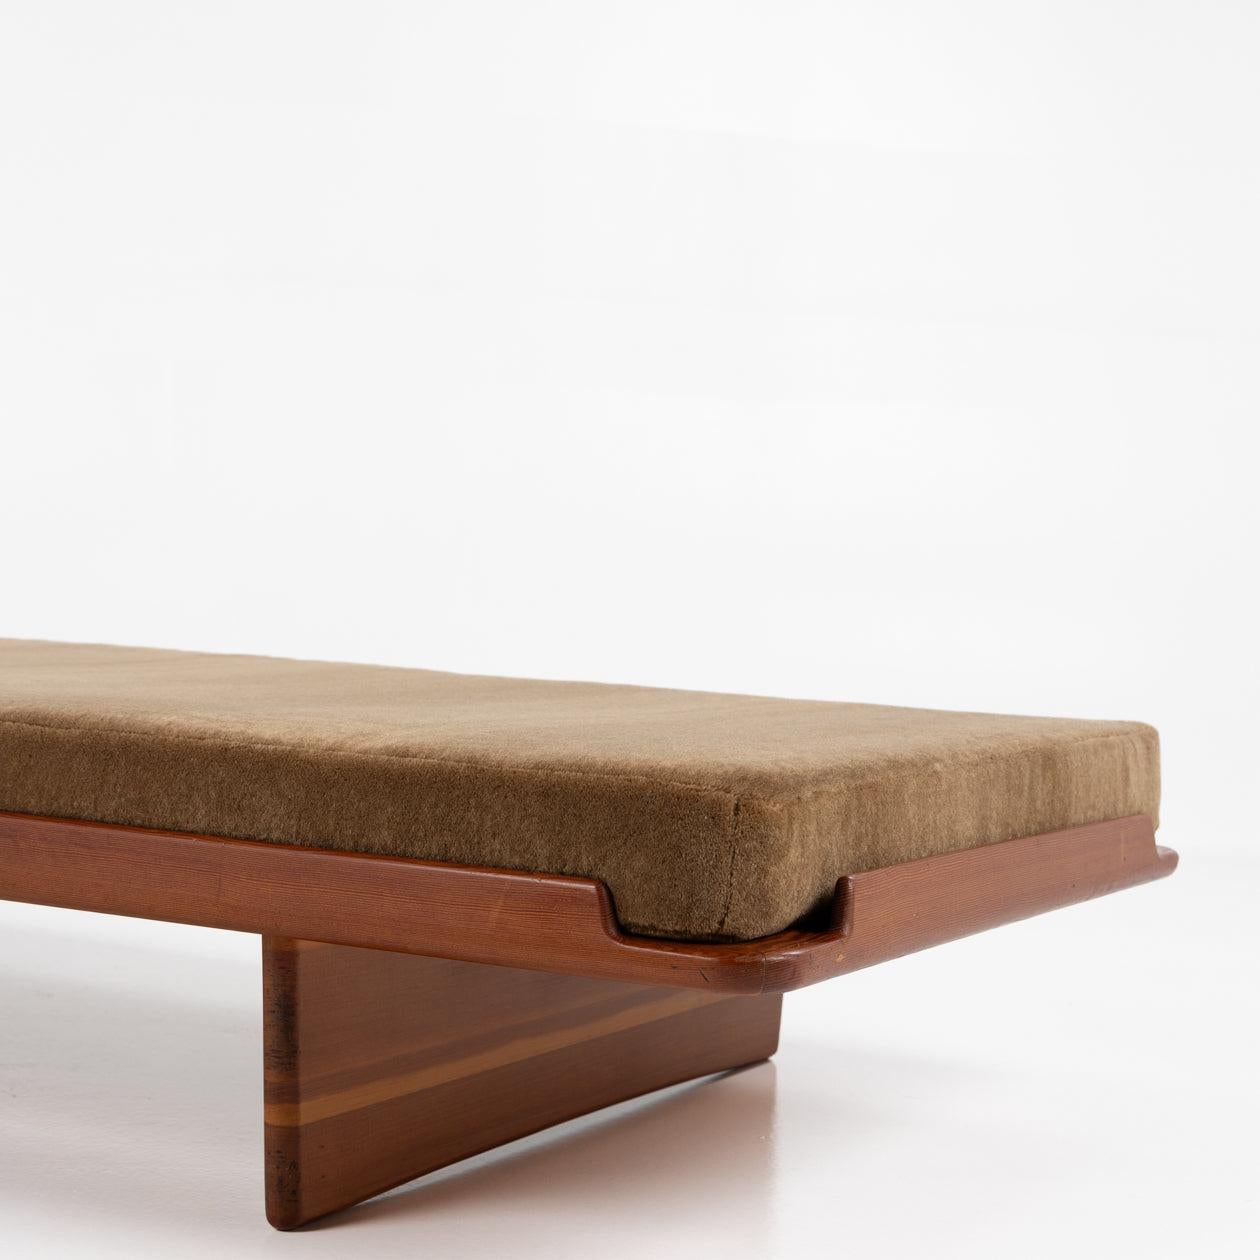 GJ Daybed in patinated Oregon pine and new fabric (Teddy Mohair Caramel 030). Grete Jalk for cabinetmaker P. Jeppesen, 1950's.